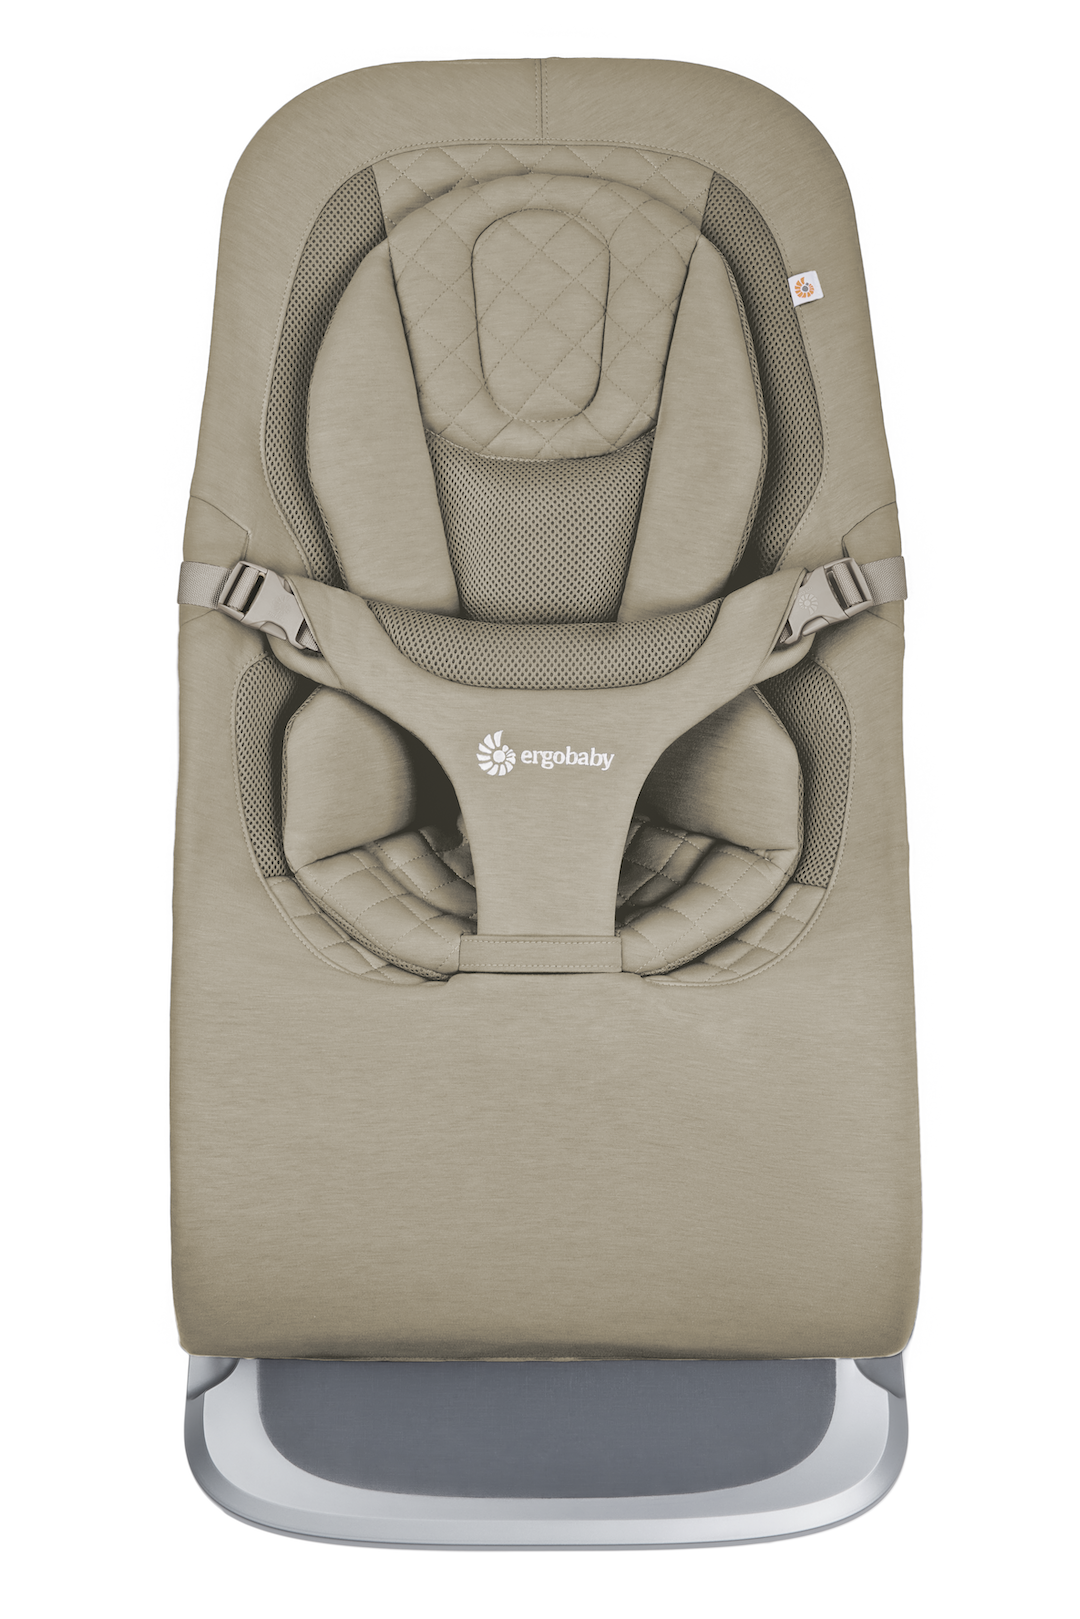 Ergobaby 3-in-1 Evolve | Baby Bouncer | Soft Olive | Direct4baby